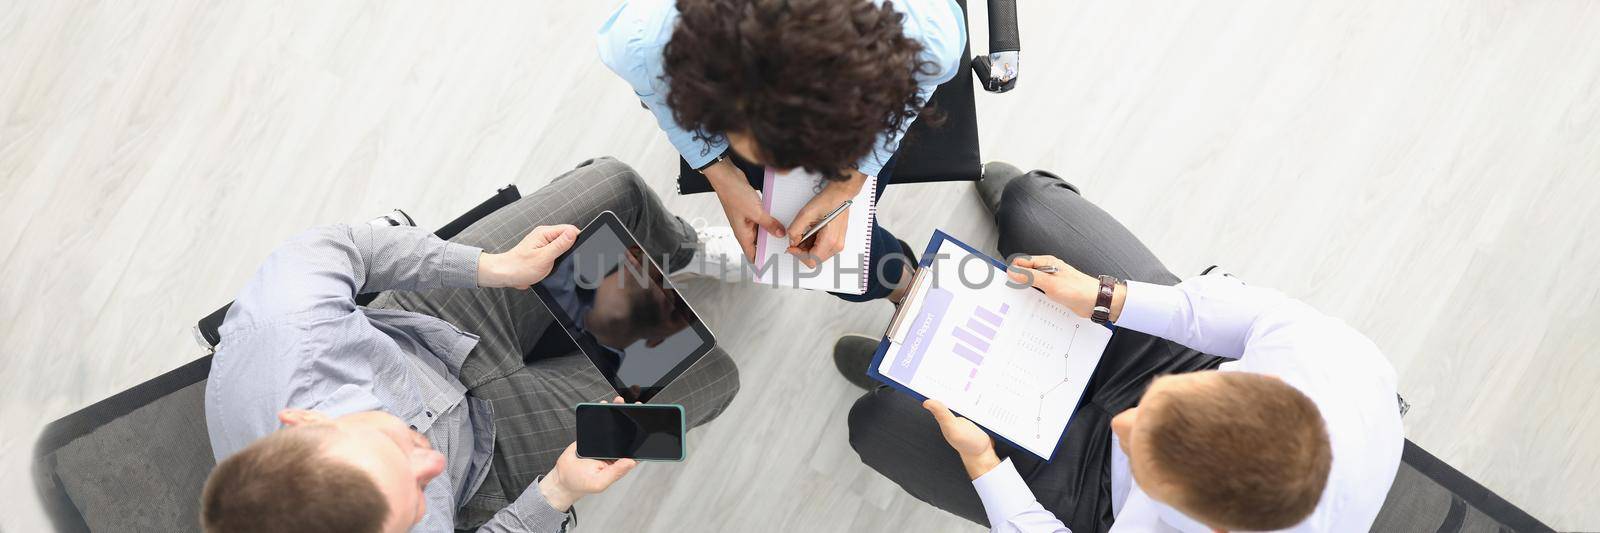 Top view of team having meeting to solve company problems, preparing report on finished projects. Creative workers with devices. Teamwork, job, office life, business concept